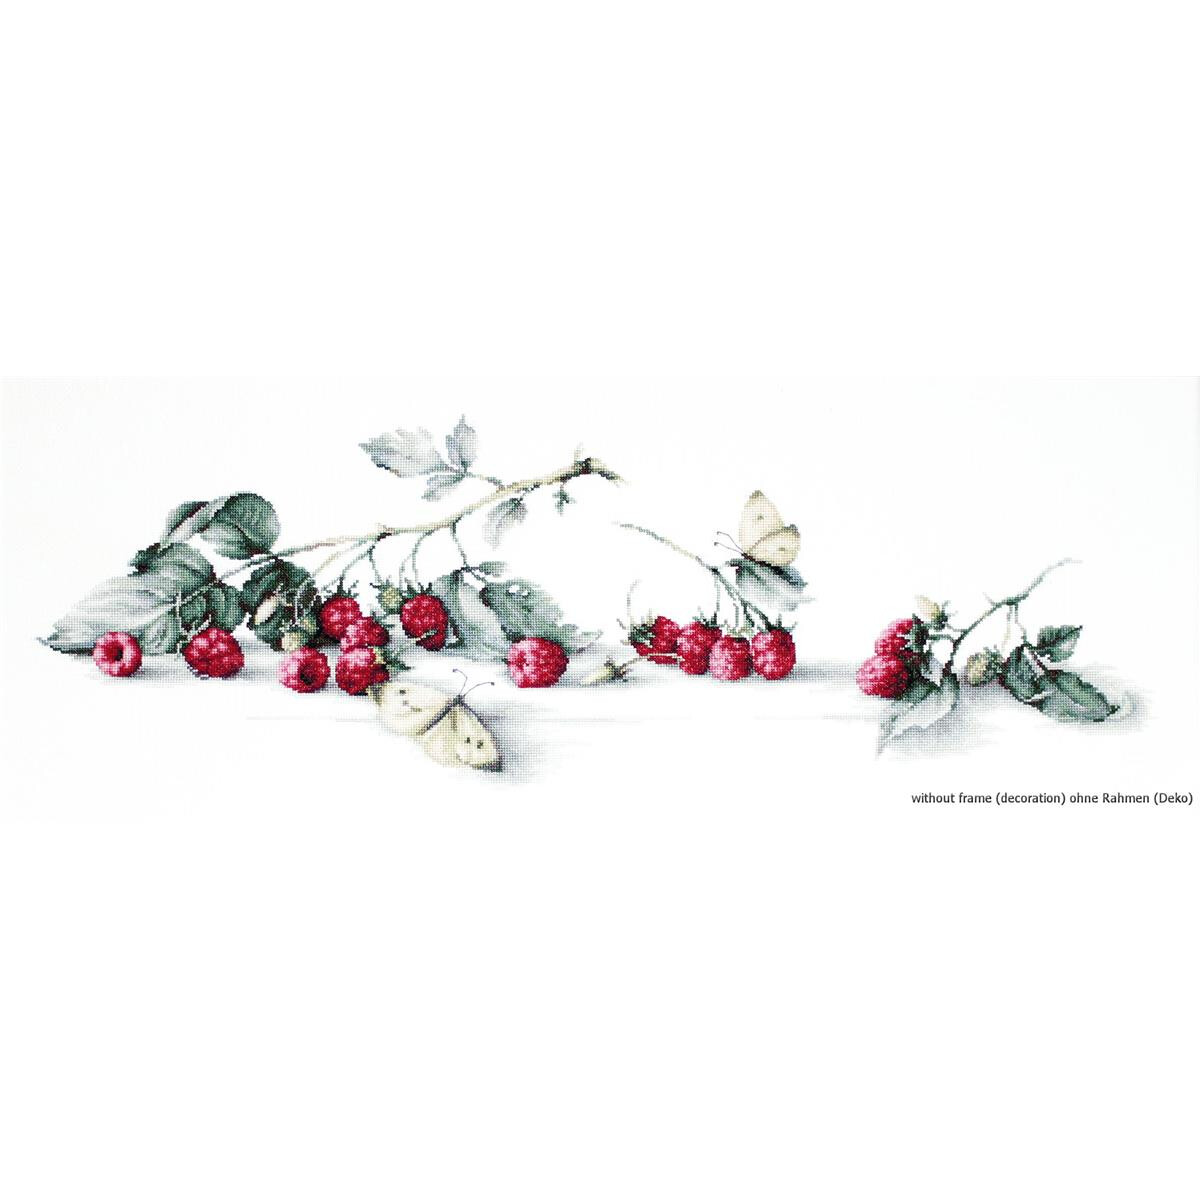 Luca-S counted Cross Stitch kit "Raspberries with...